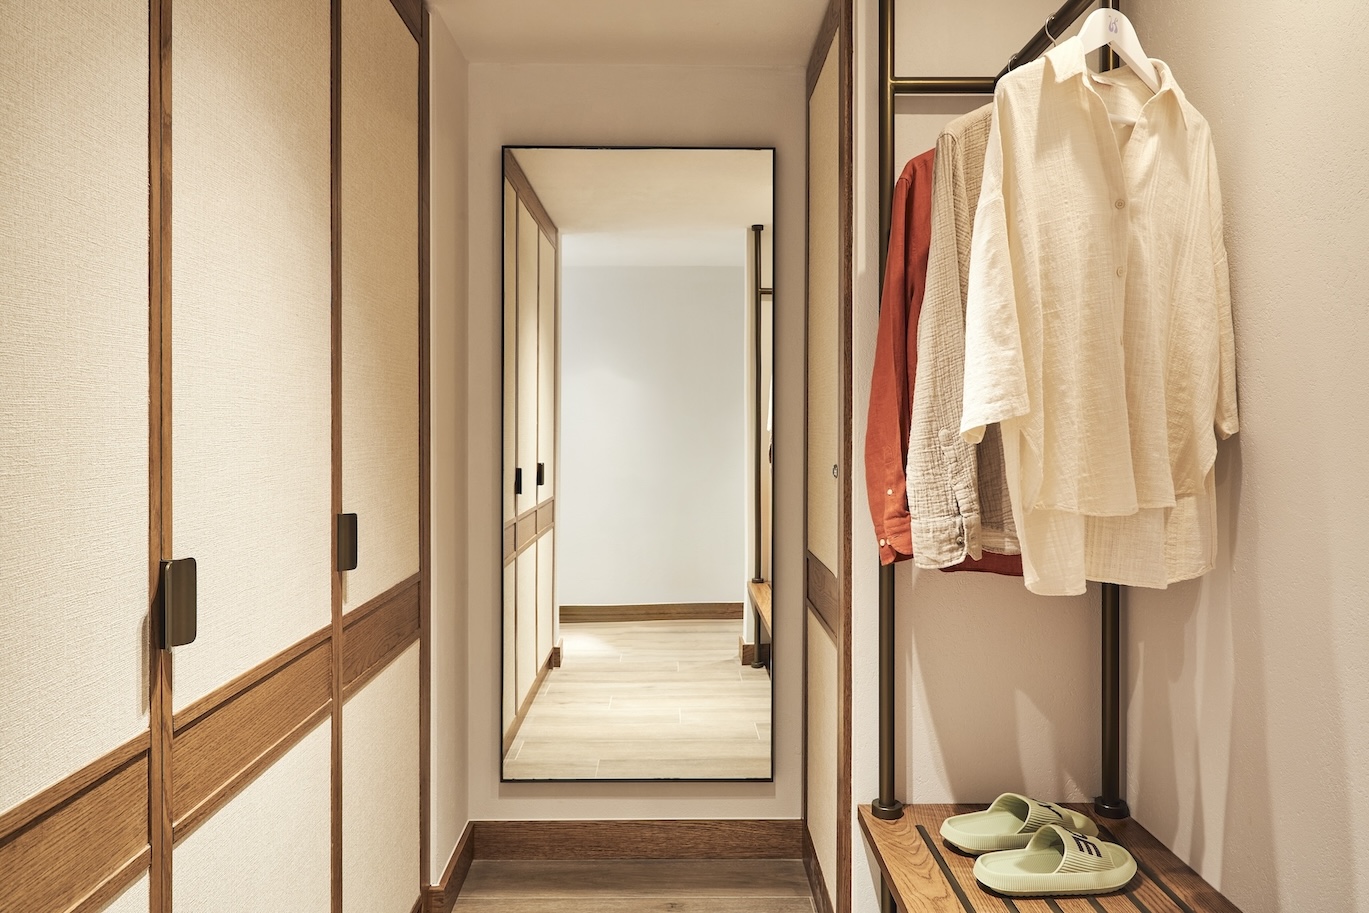 Hallway view of a wardrobe with clothes hanging and a full-length mirror